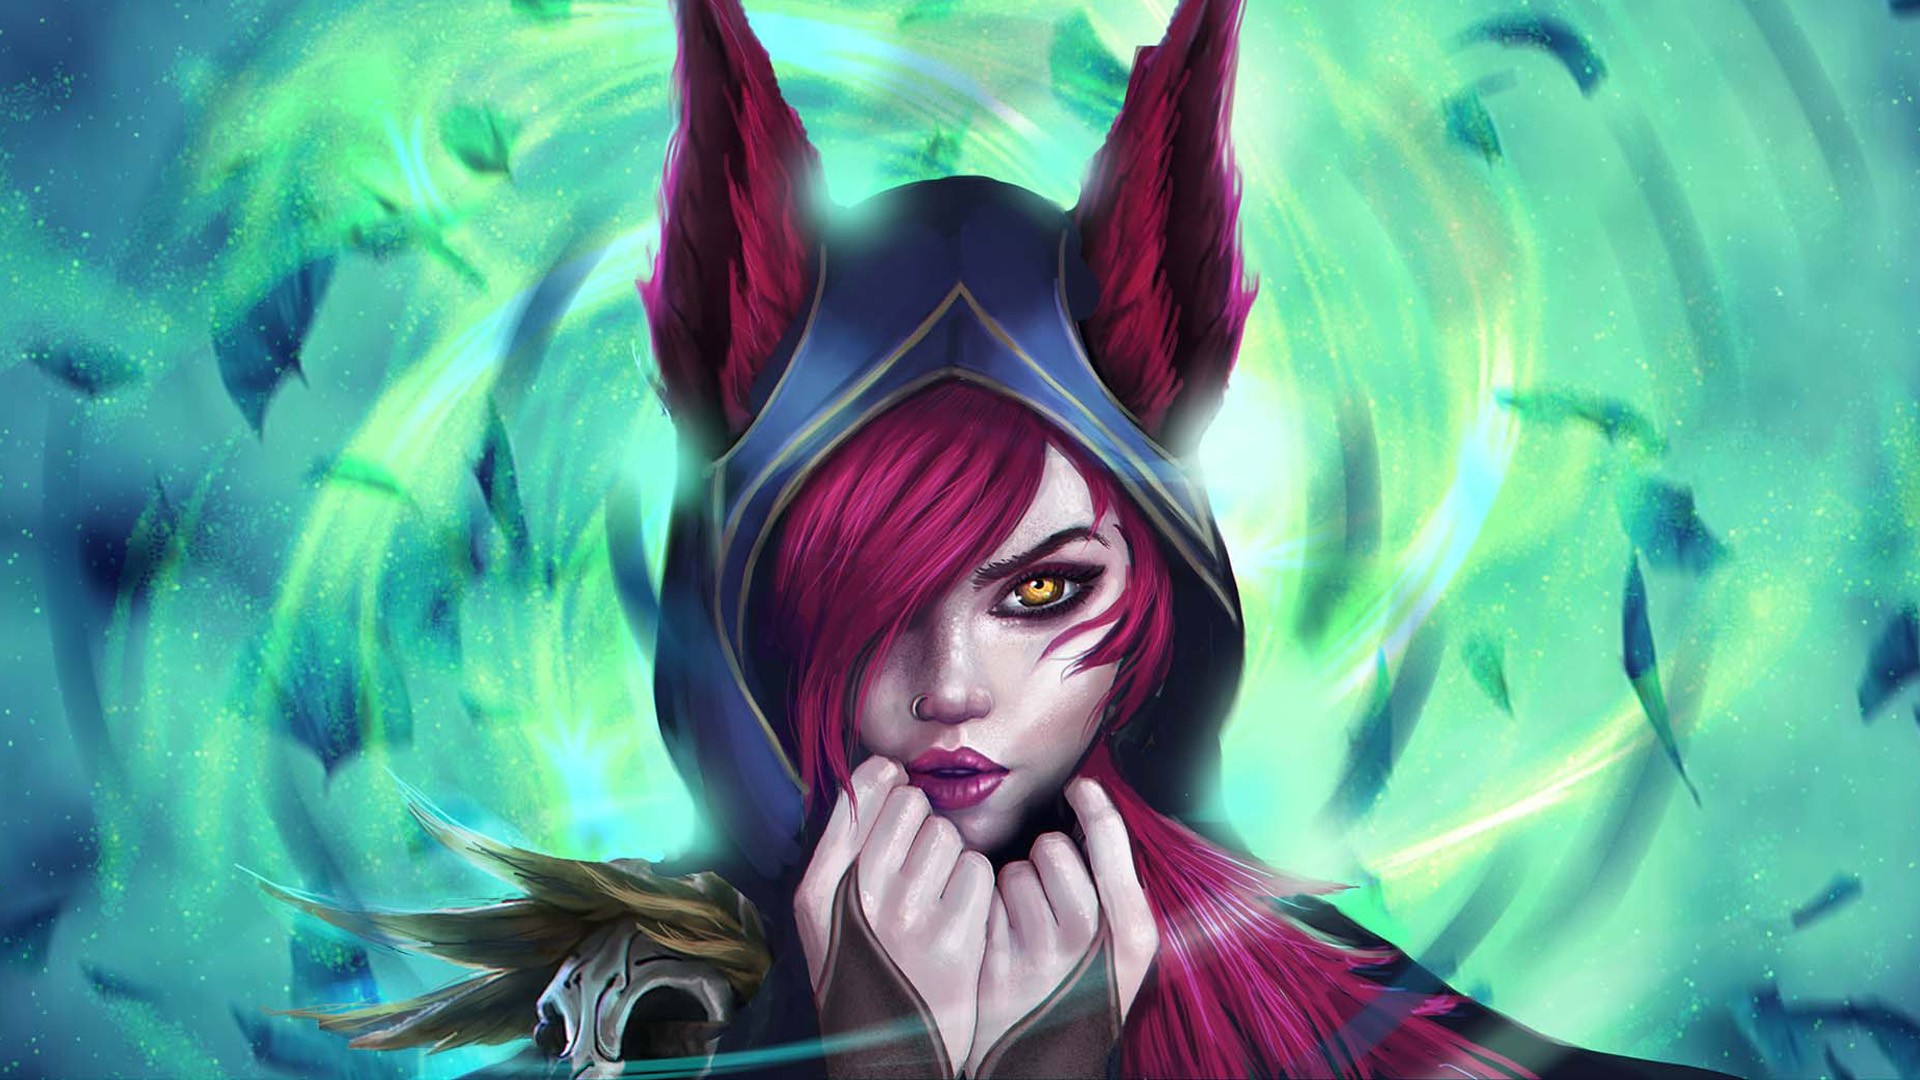 General 1920x1080 League of Legends Xayah (League of Legends) fantasy girl anime girls yellow eyes redhead PC gaming turquoise green digital art